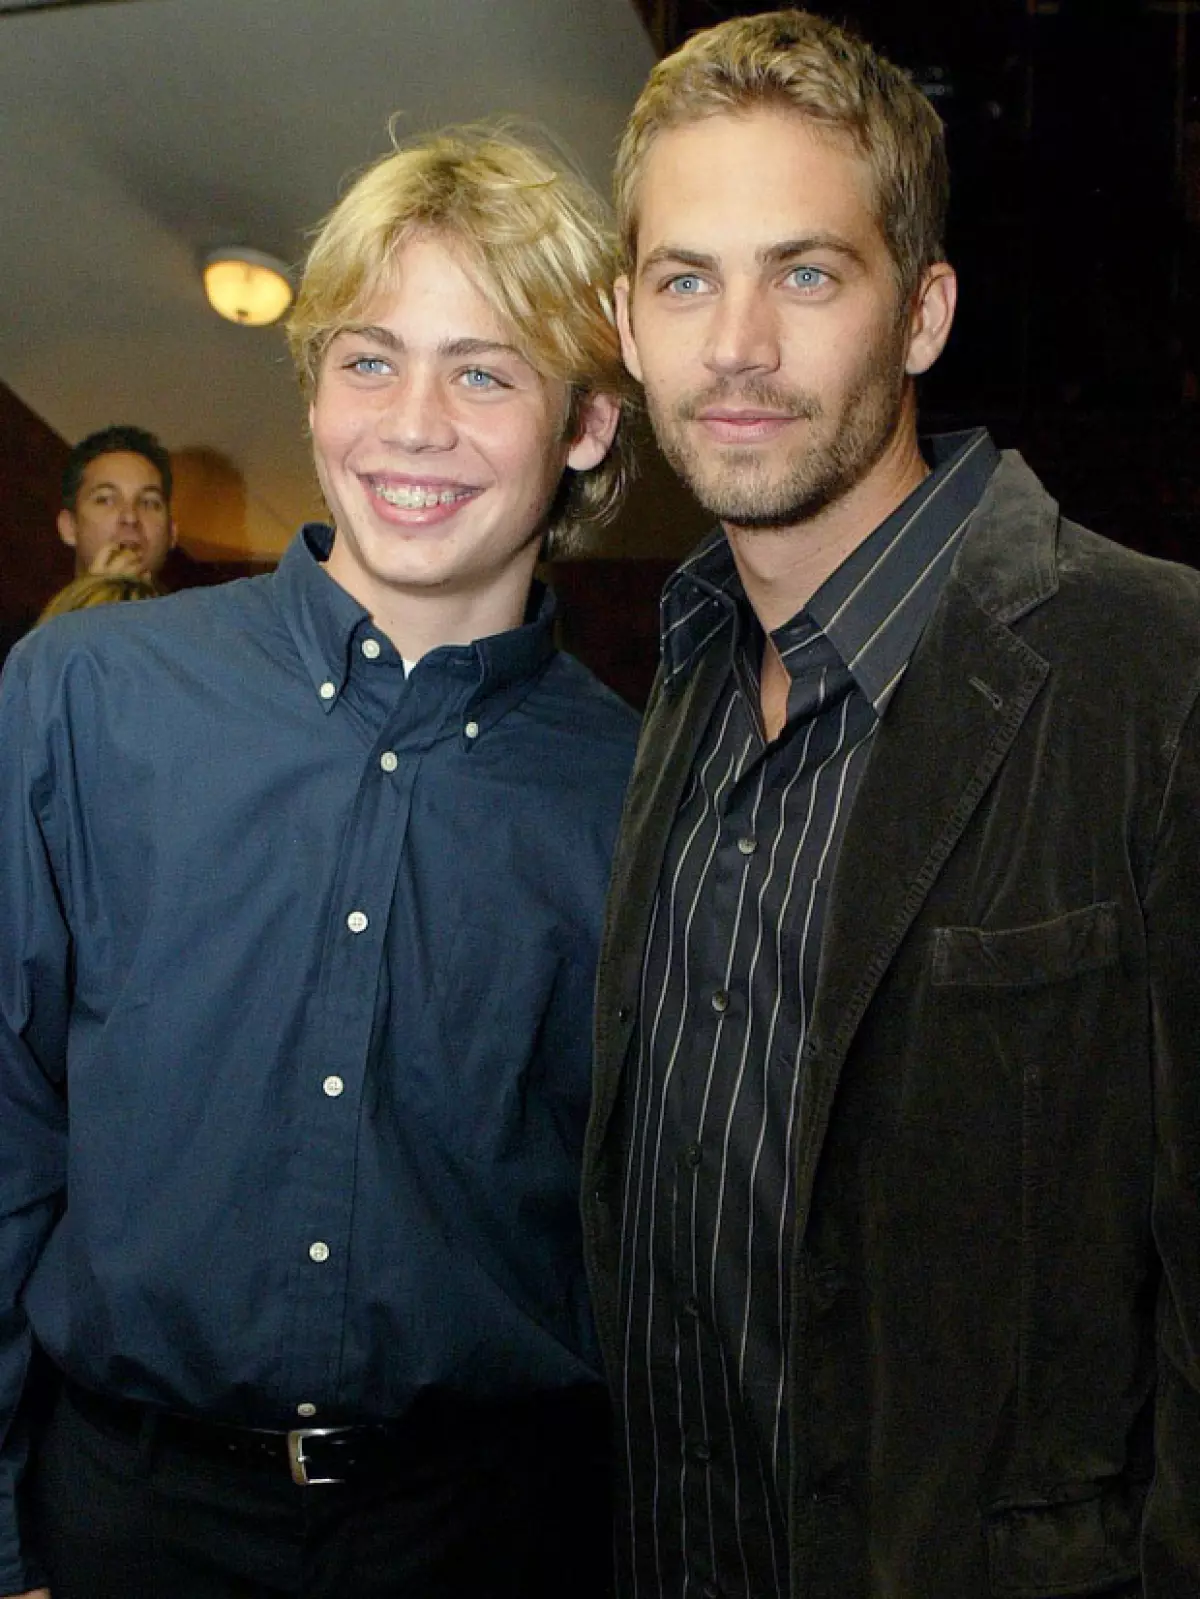 Paul Walkers Brothers Everything To Know About His 2 Siblings And The Part They Played In ‘fast 